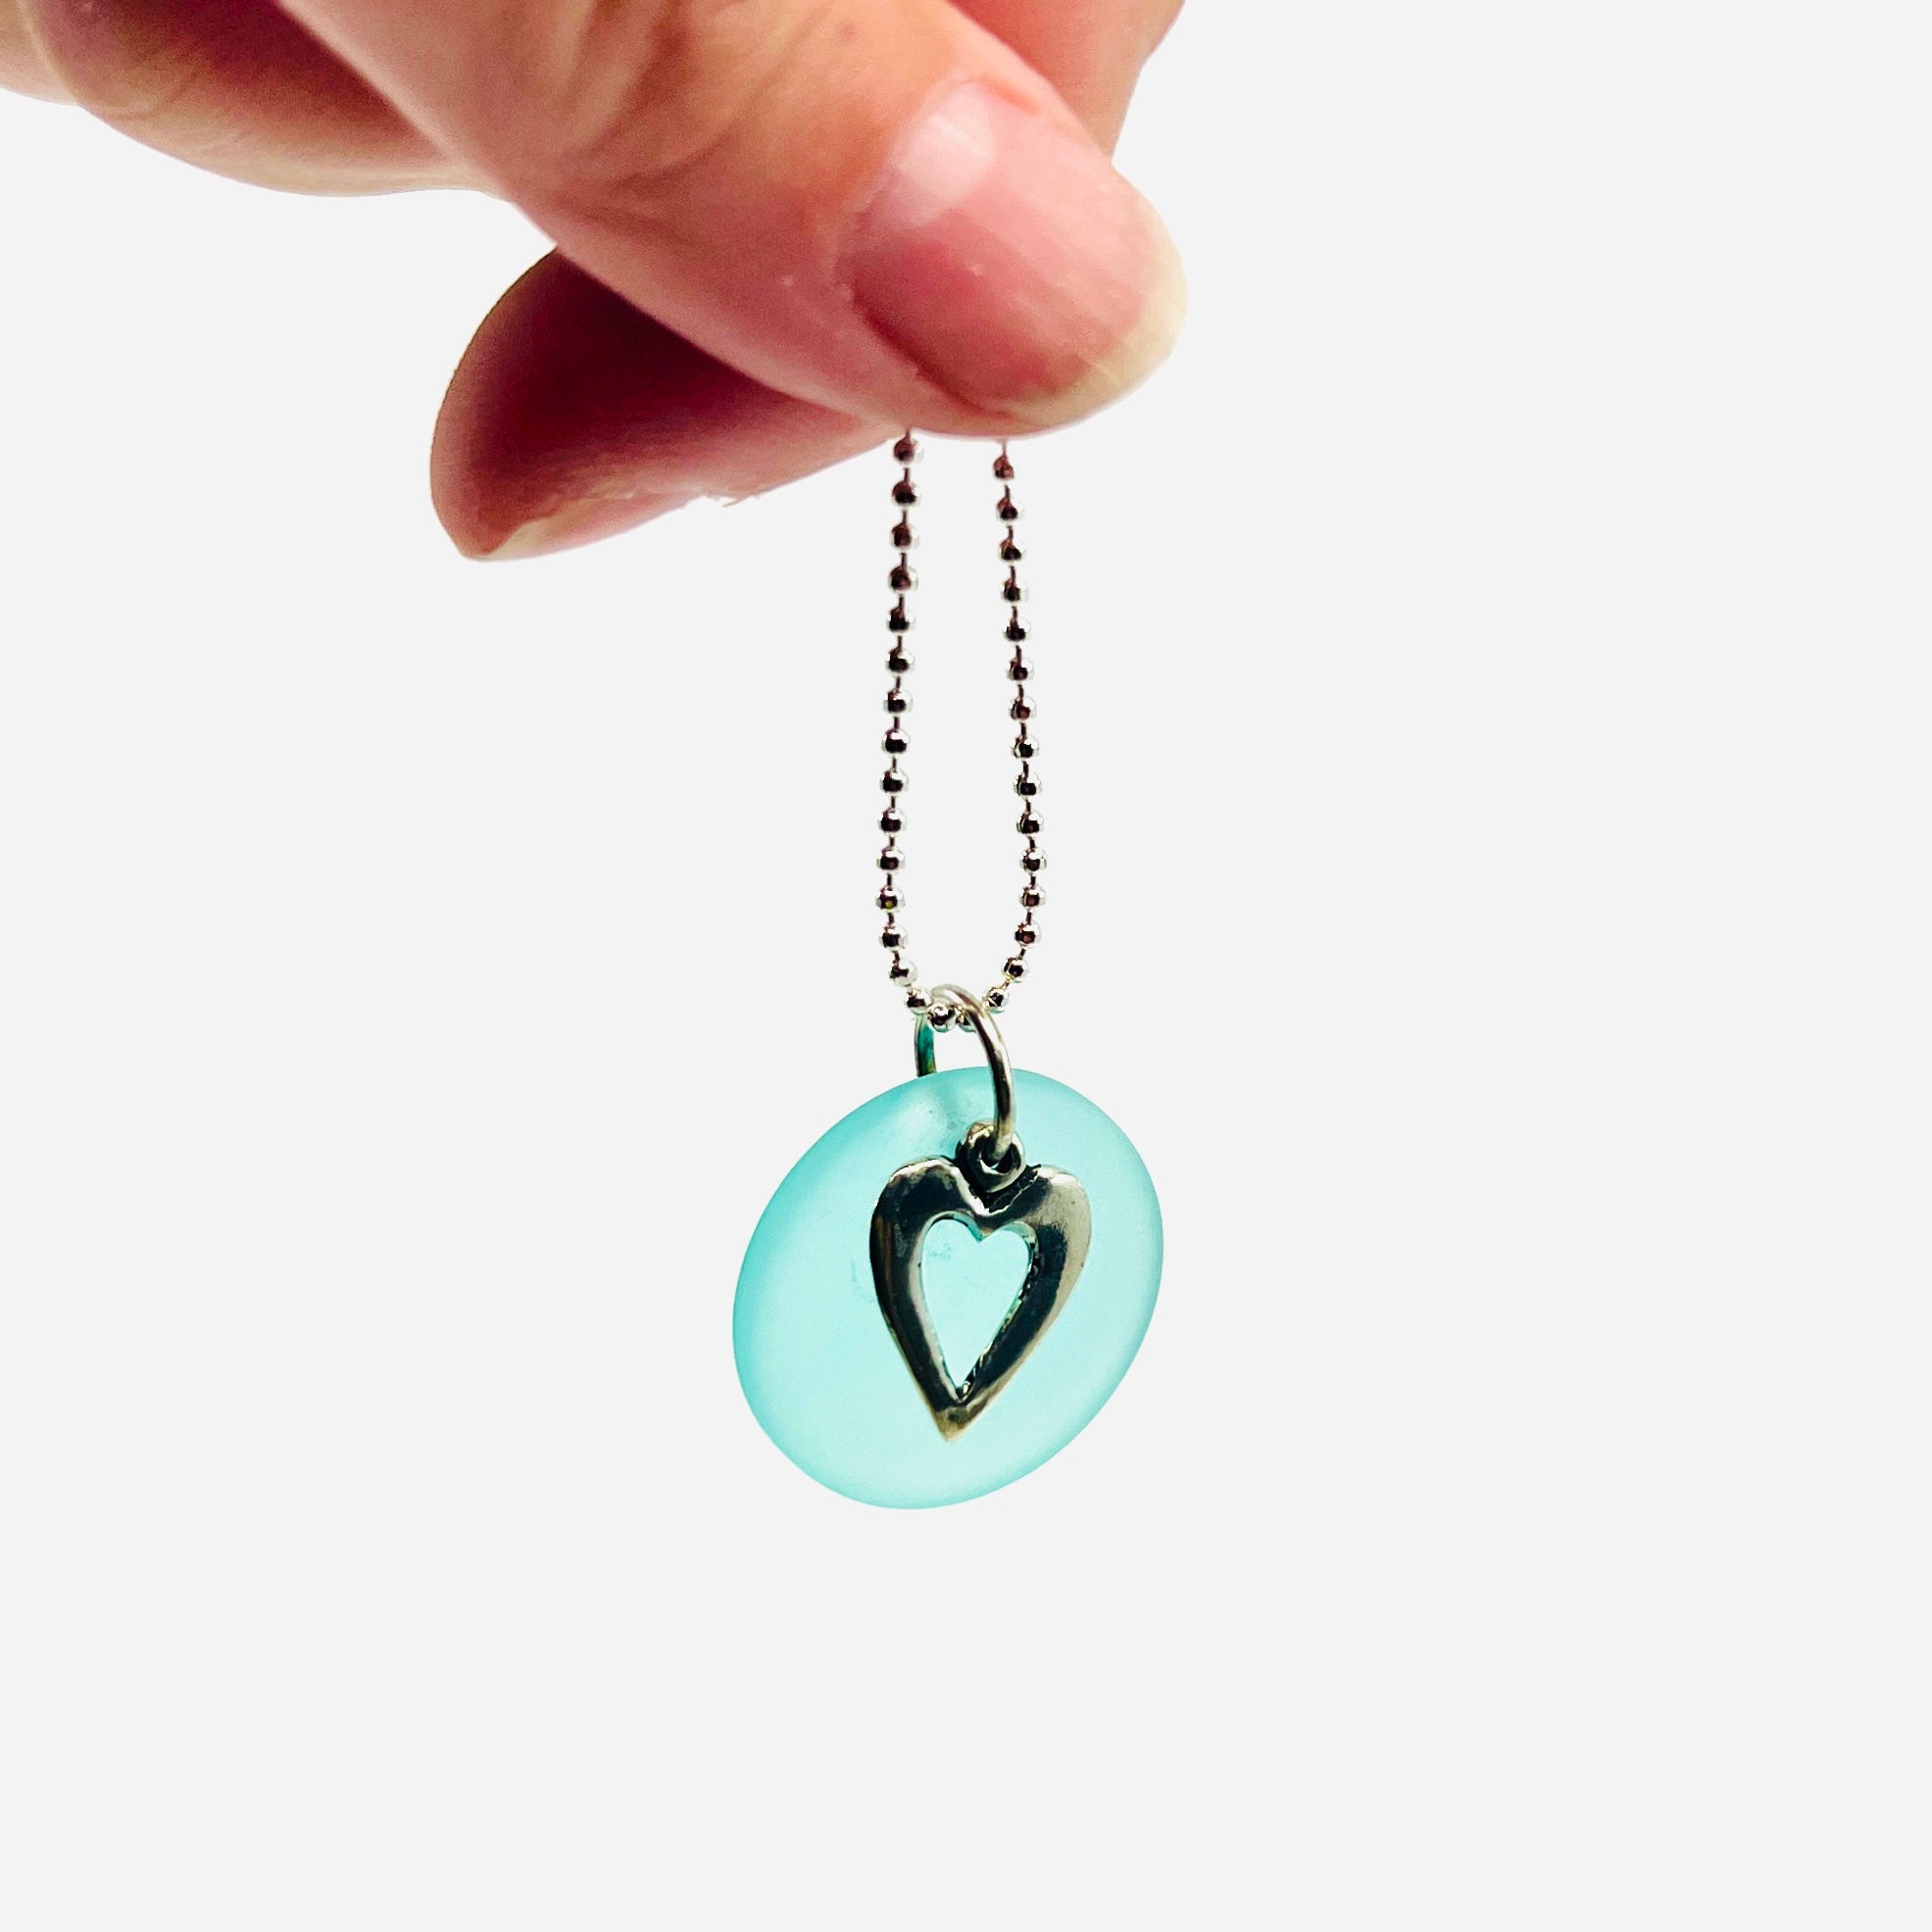 Pewter Heart Pendant Necklace with aqua Sea glass Jewelry Whitney Howard Designs 